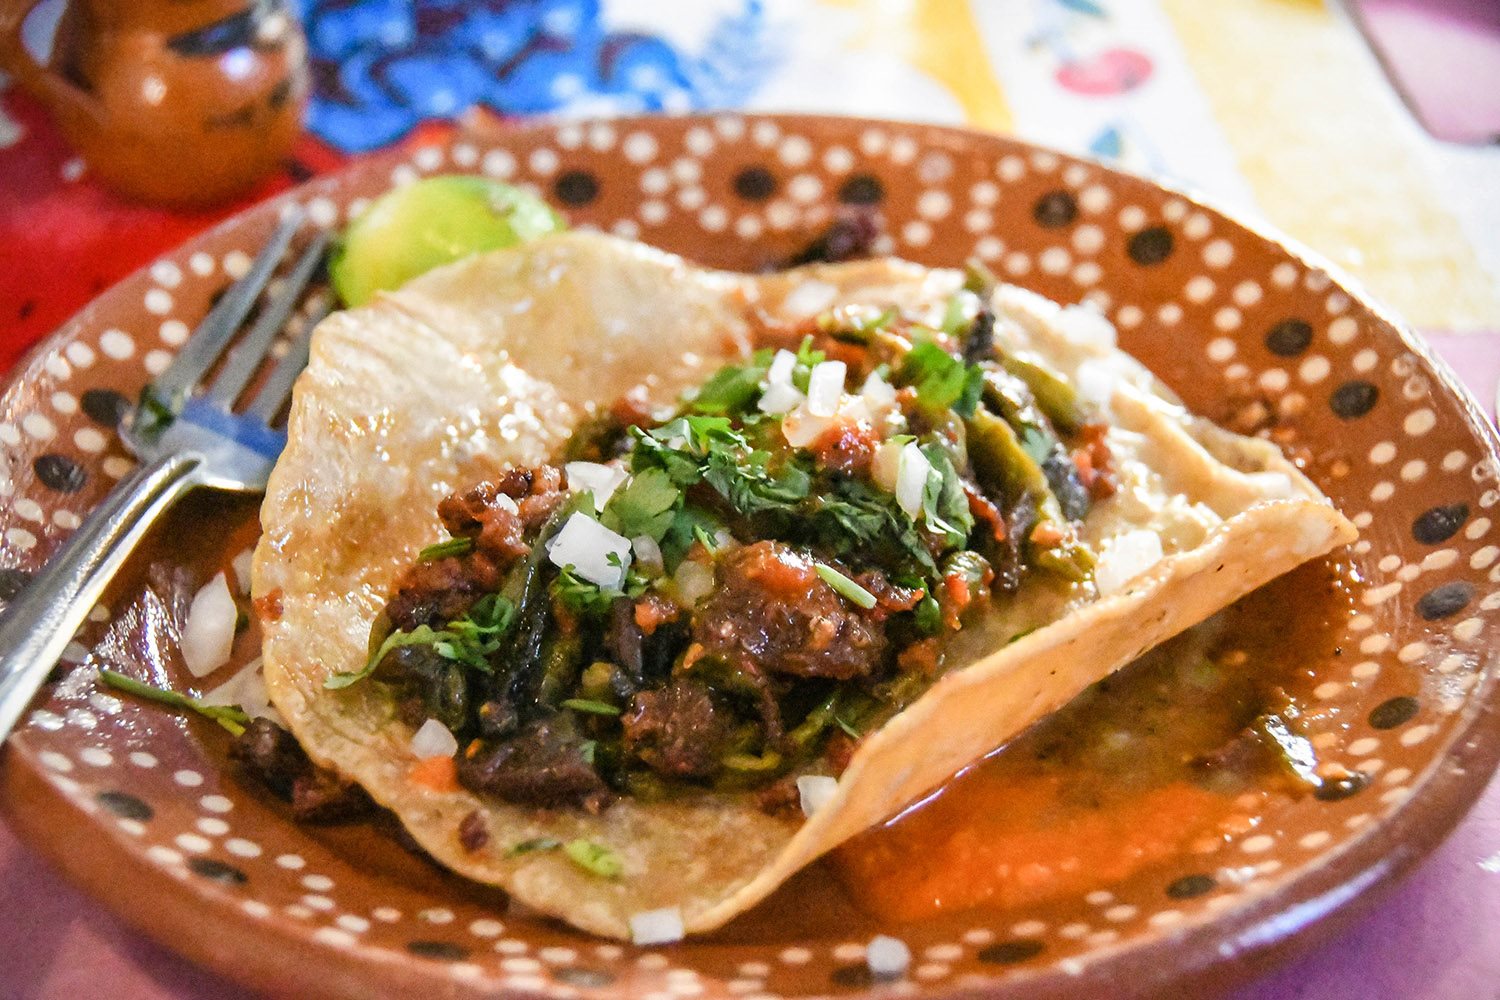 food tours of mexico city